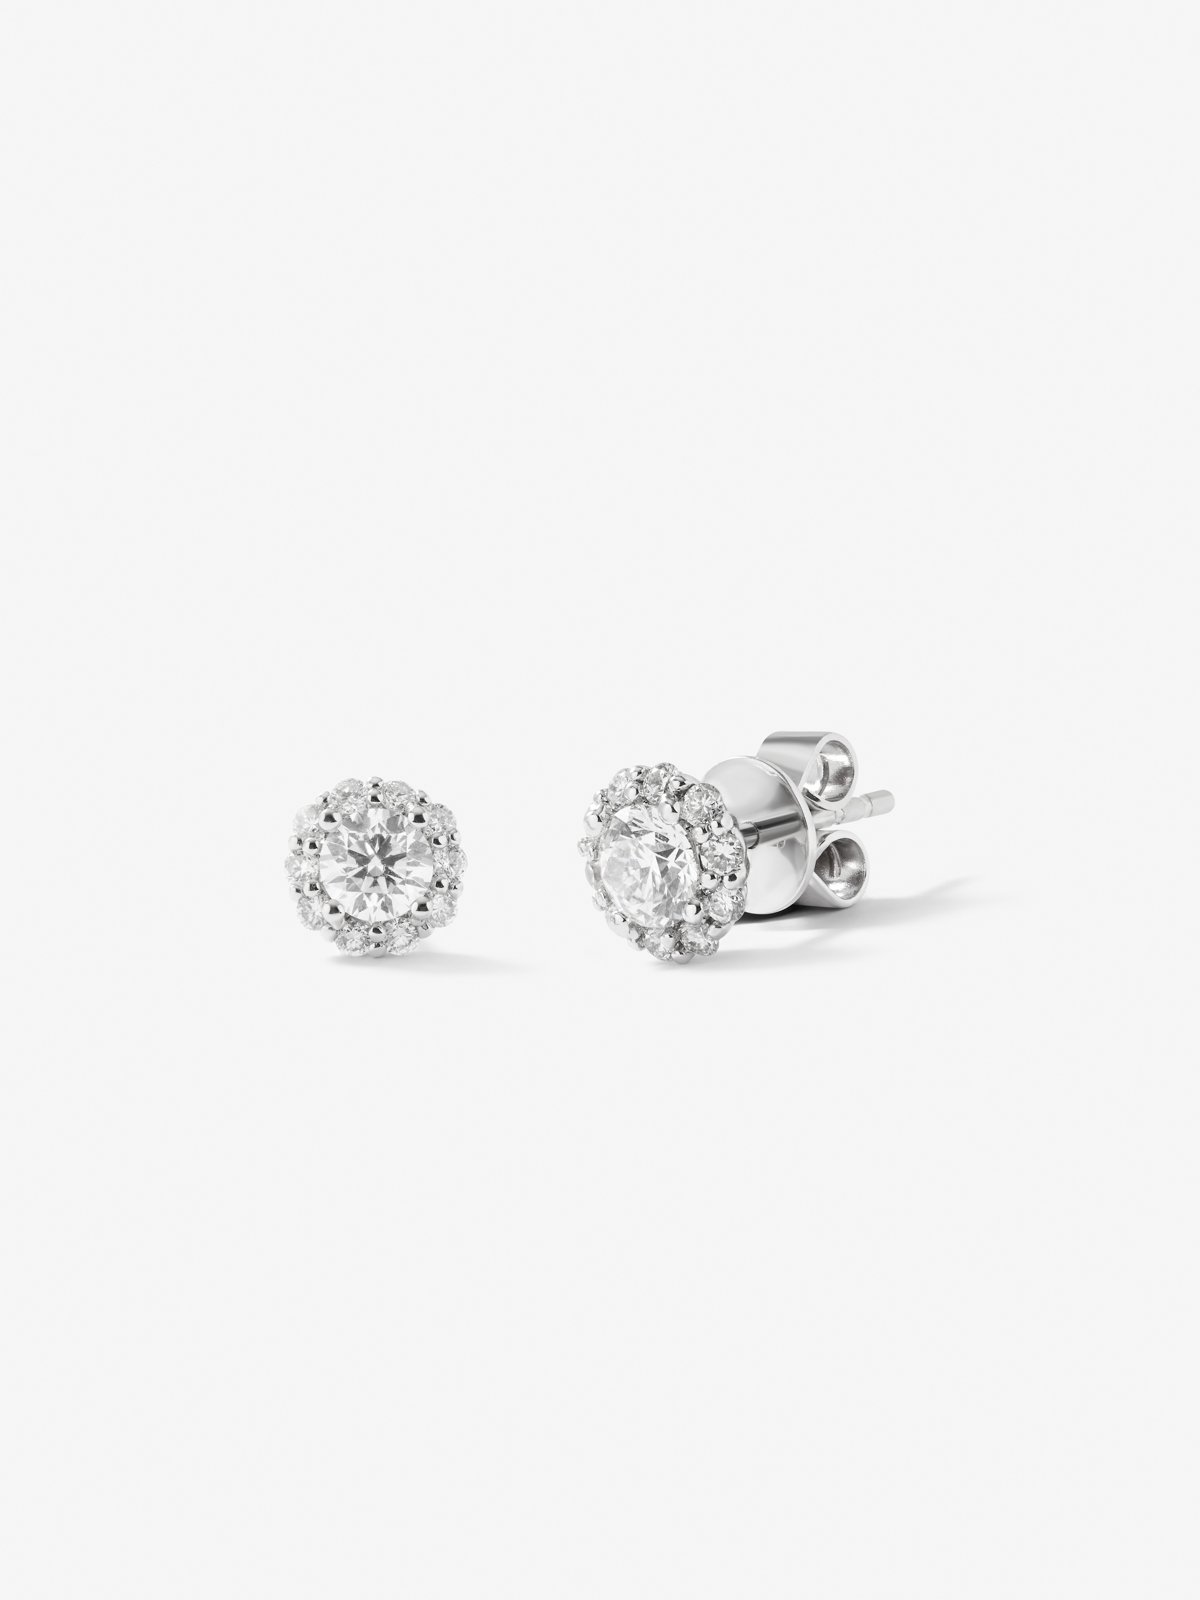 18kt white gold earrings with 0.30cts FVVS2 diamond